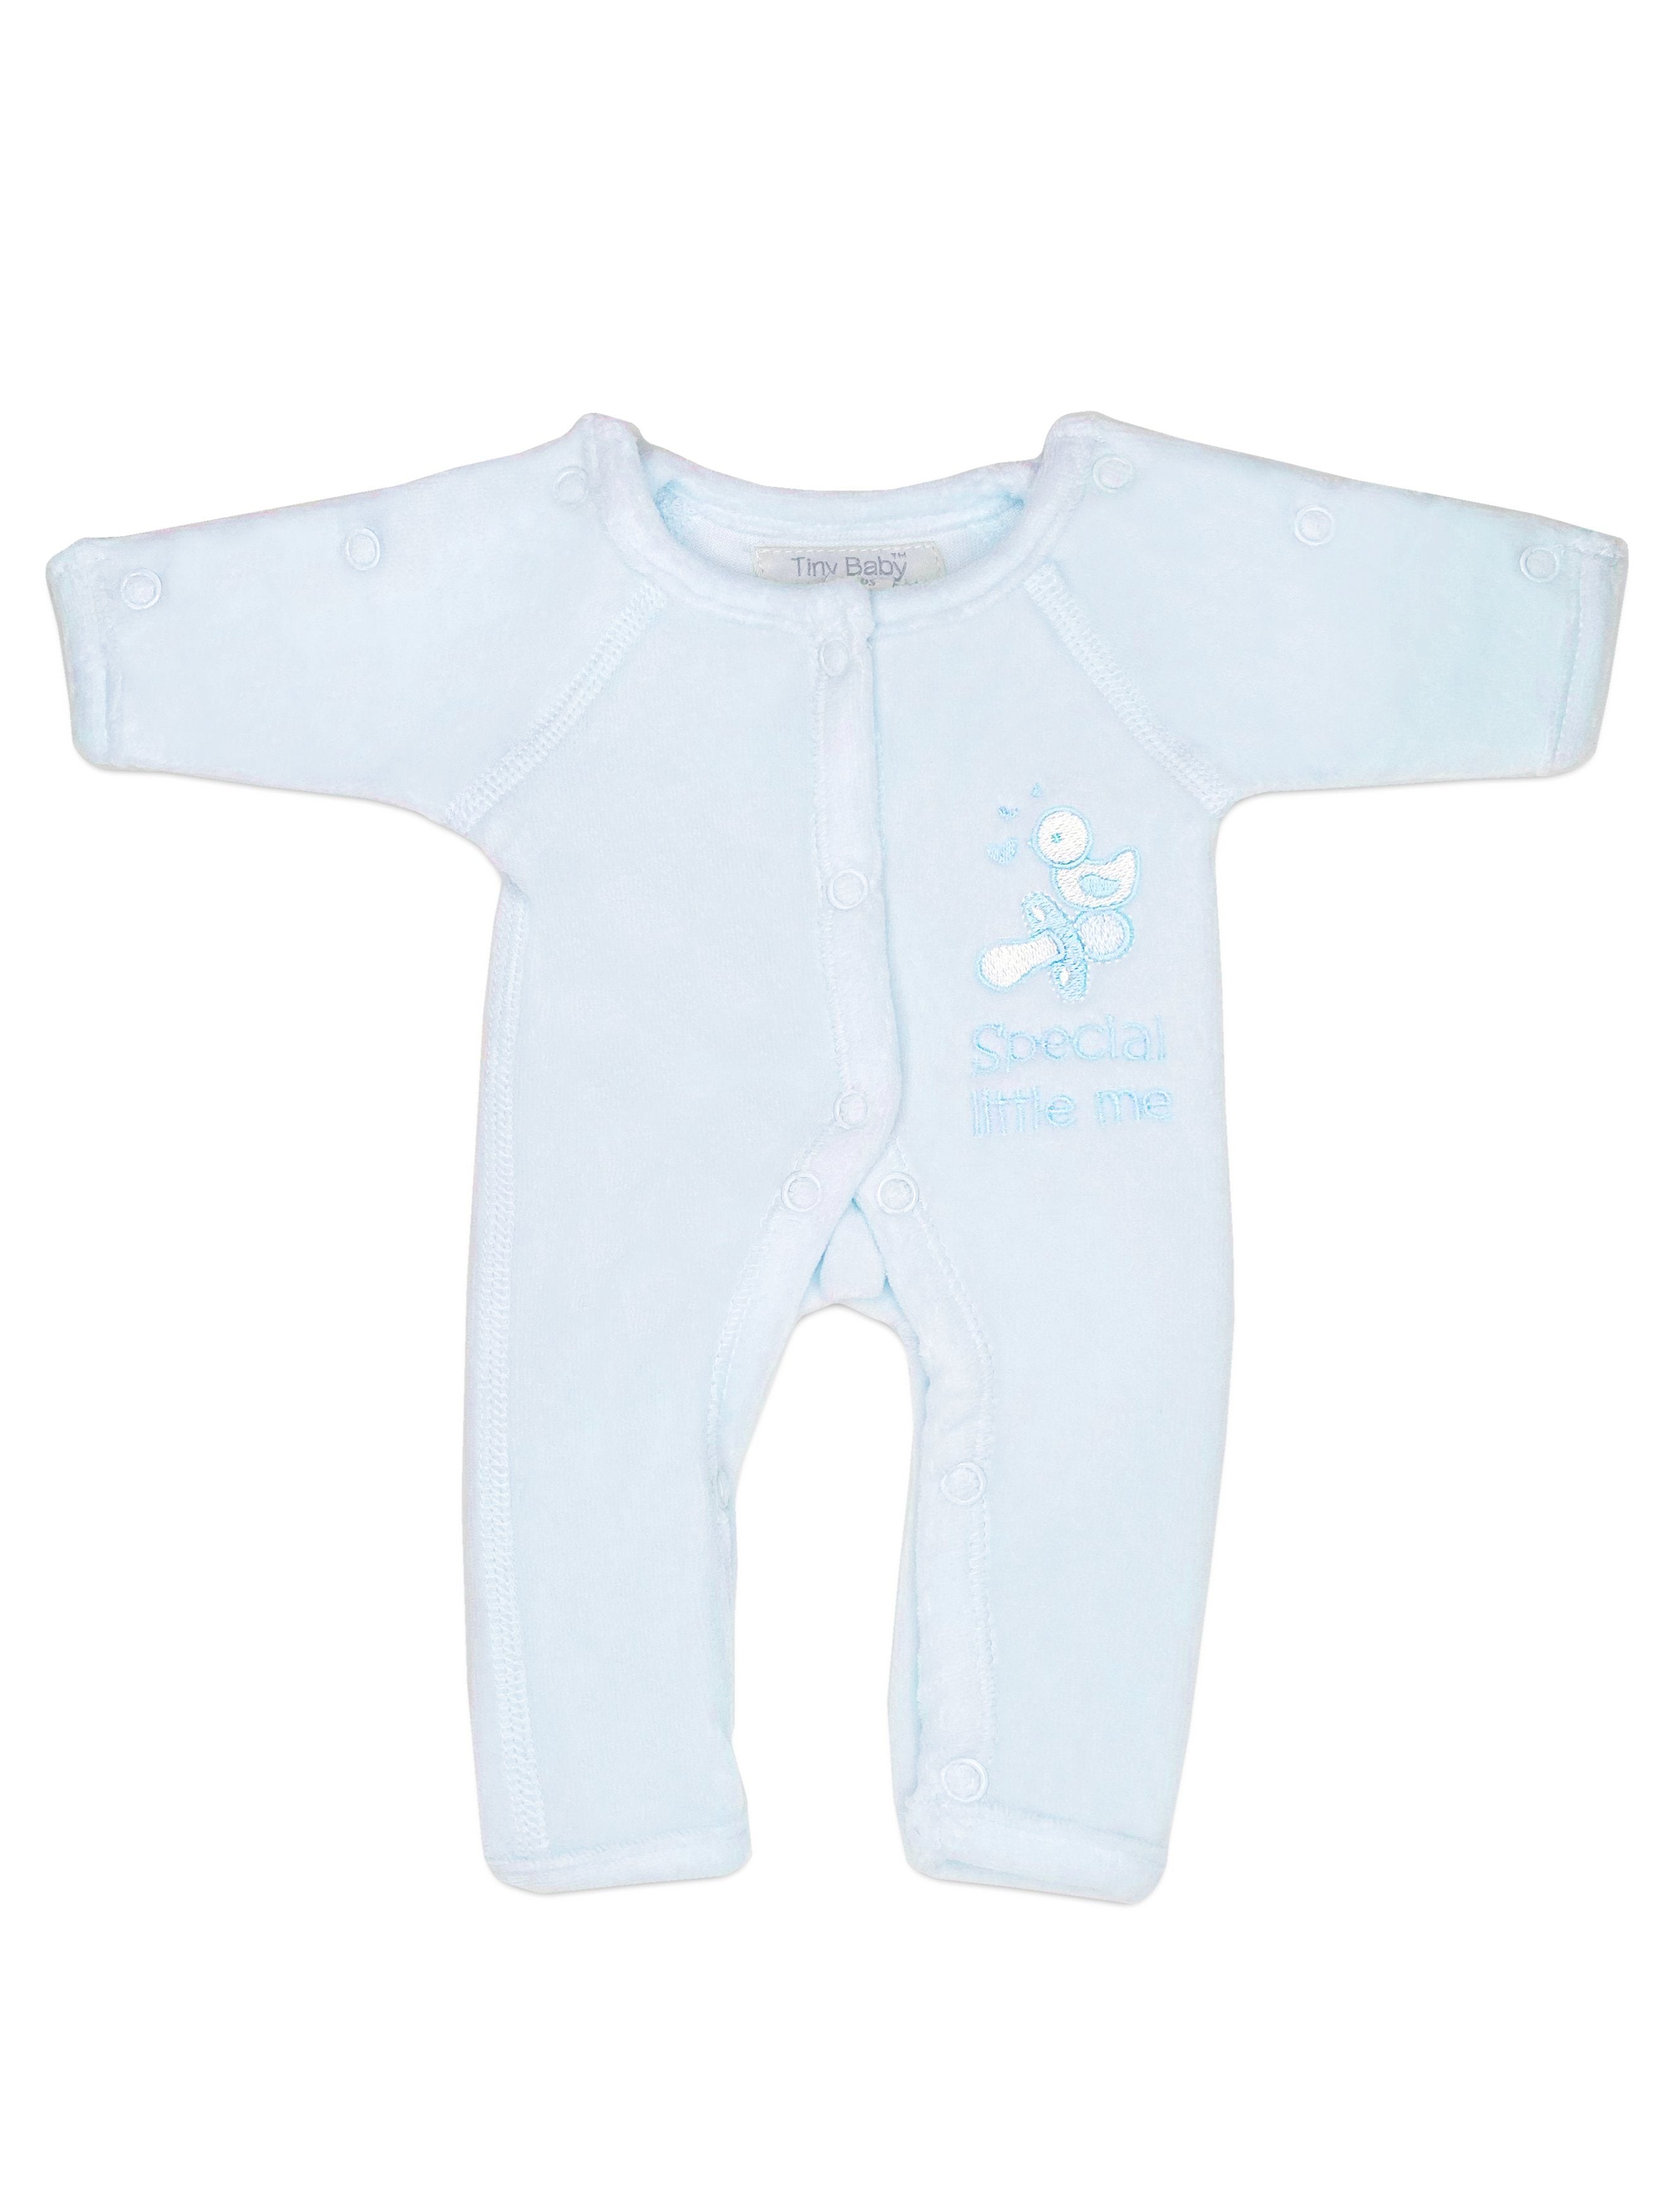 Preemie Baby Clothes: Velour, Blue 'Special Little Me' - Sleepsuit / Babygrow - Tiny Chick